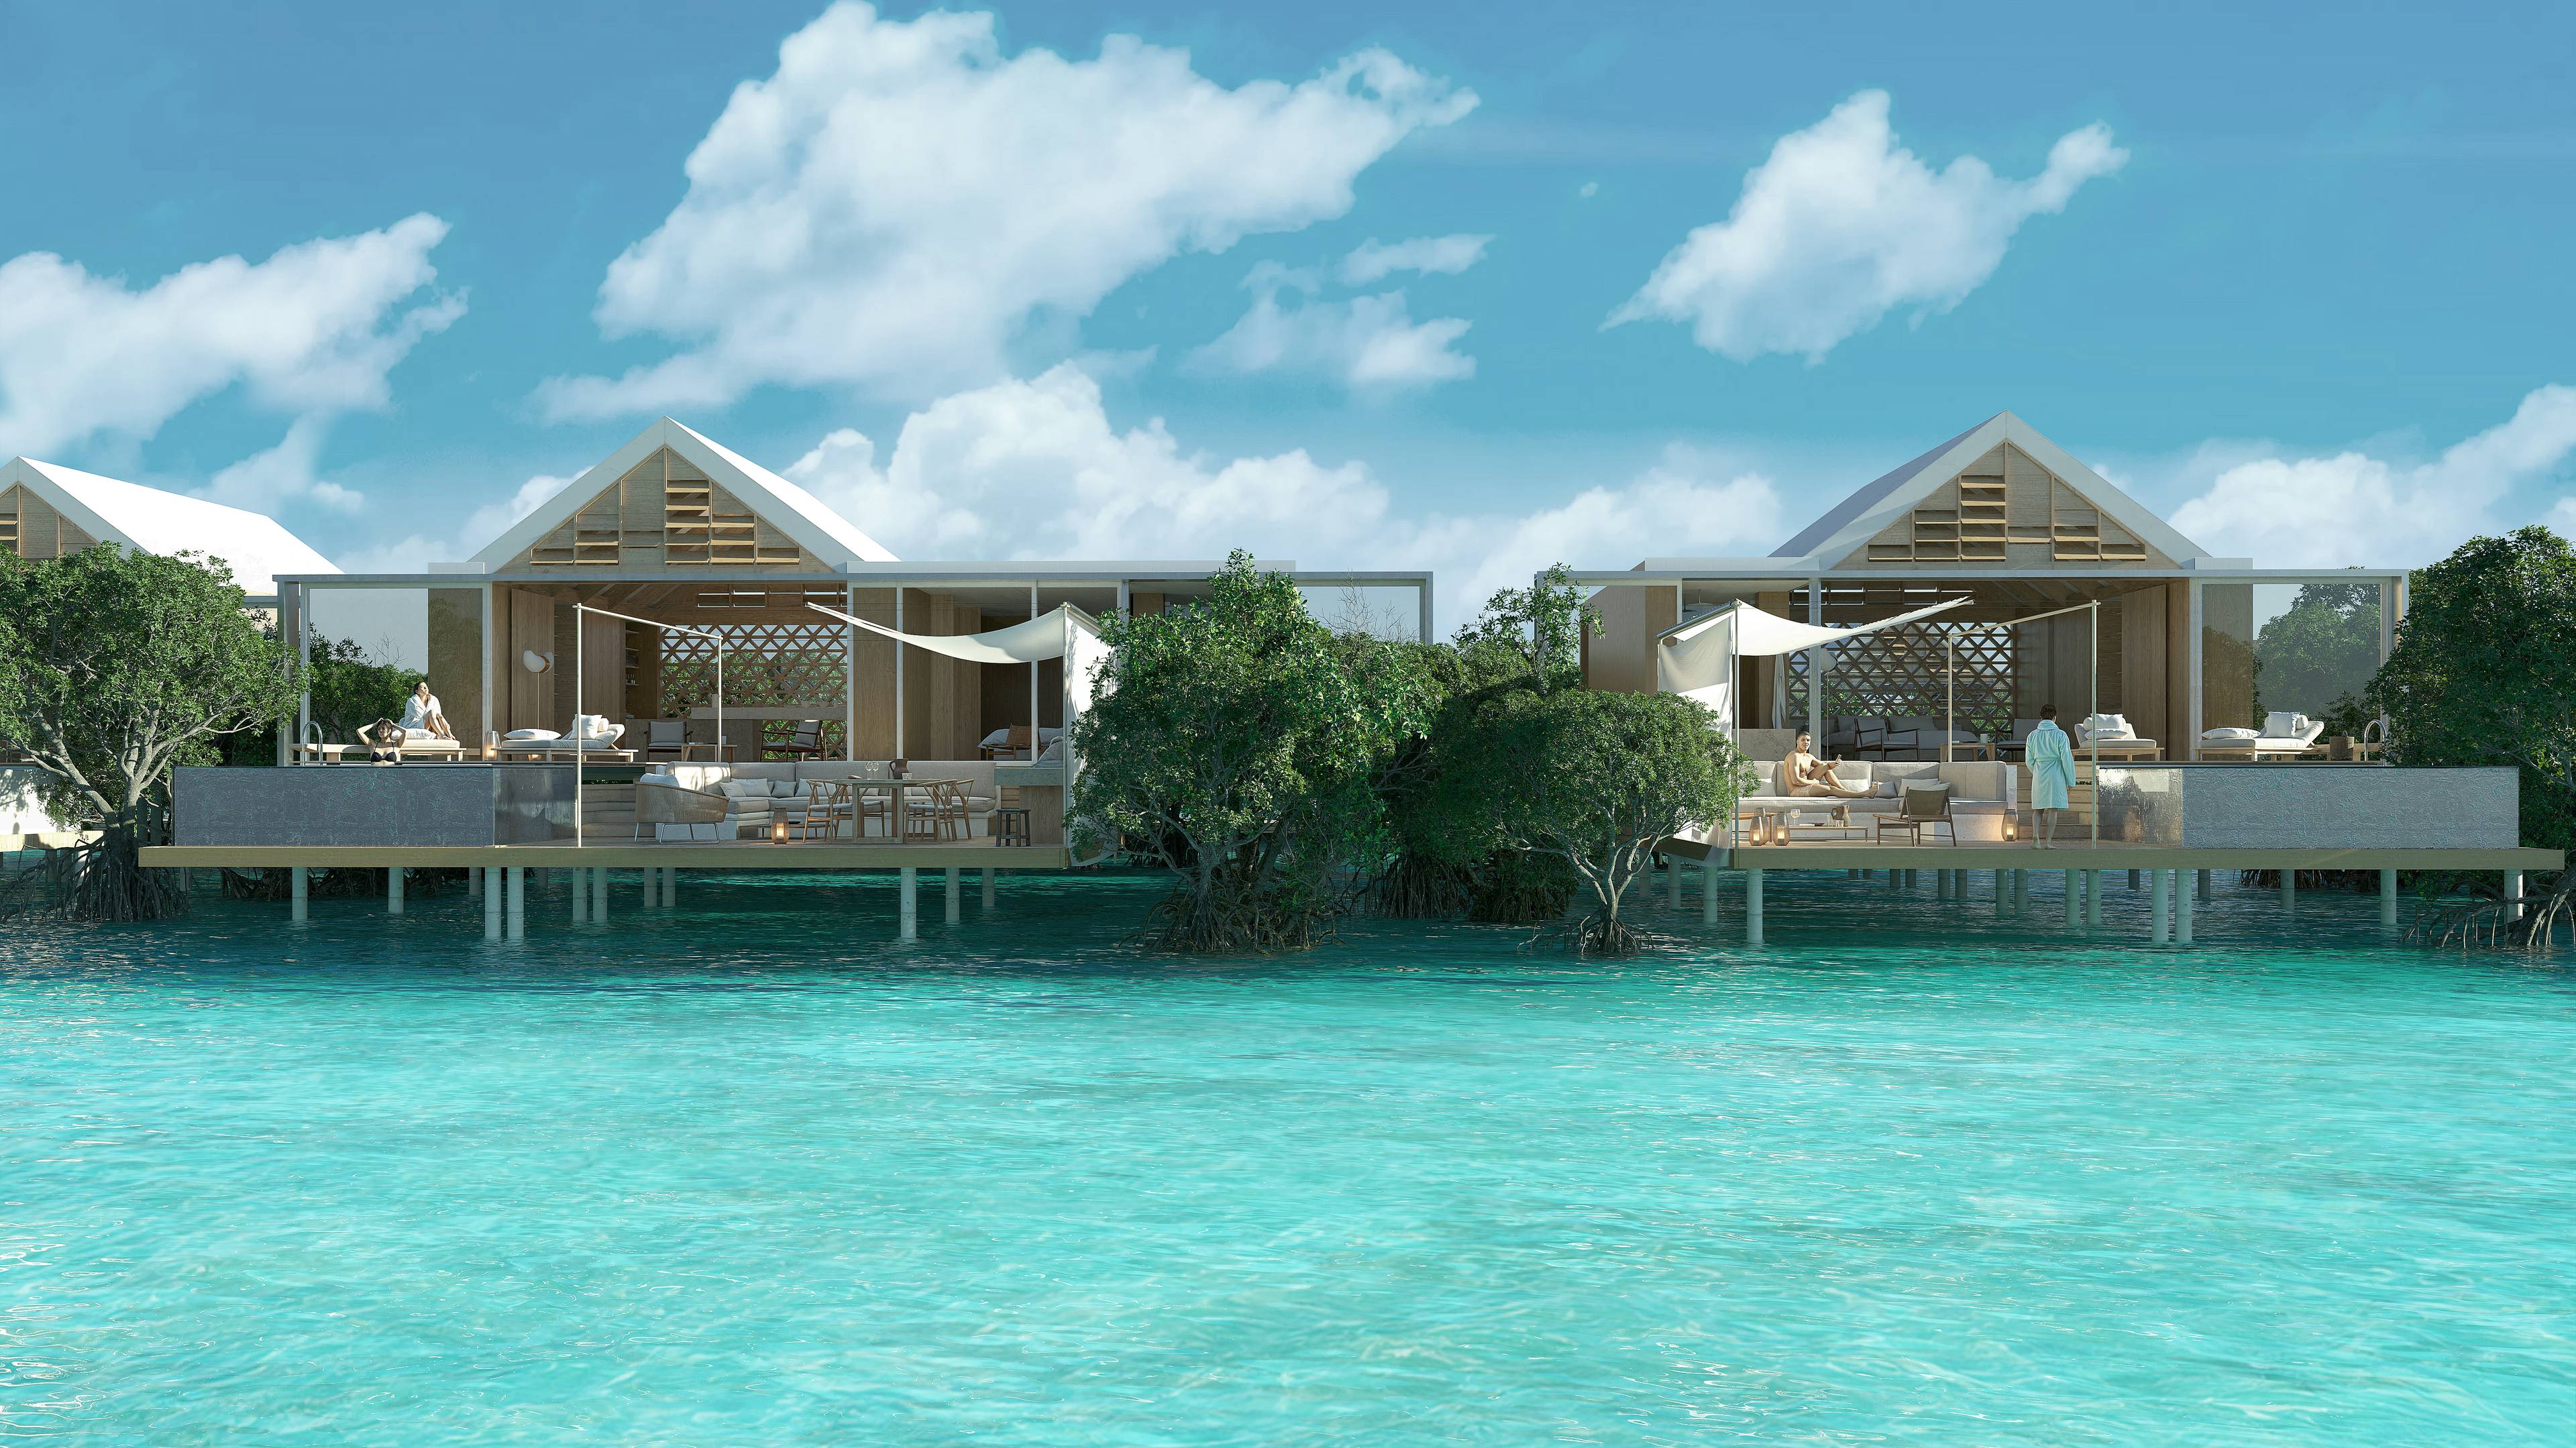 PREMIUM ONE BEDROOM VILLA on first Ultra Premium Residence Resort in the Maldives Malé Atoll